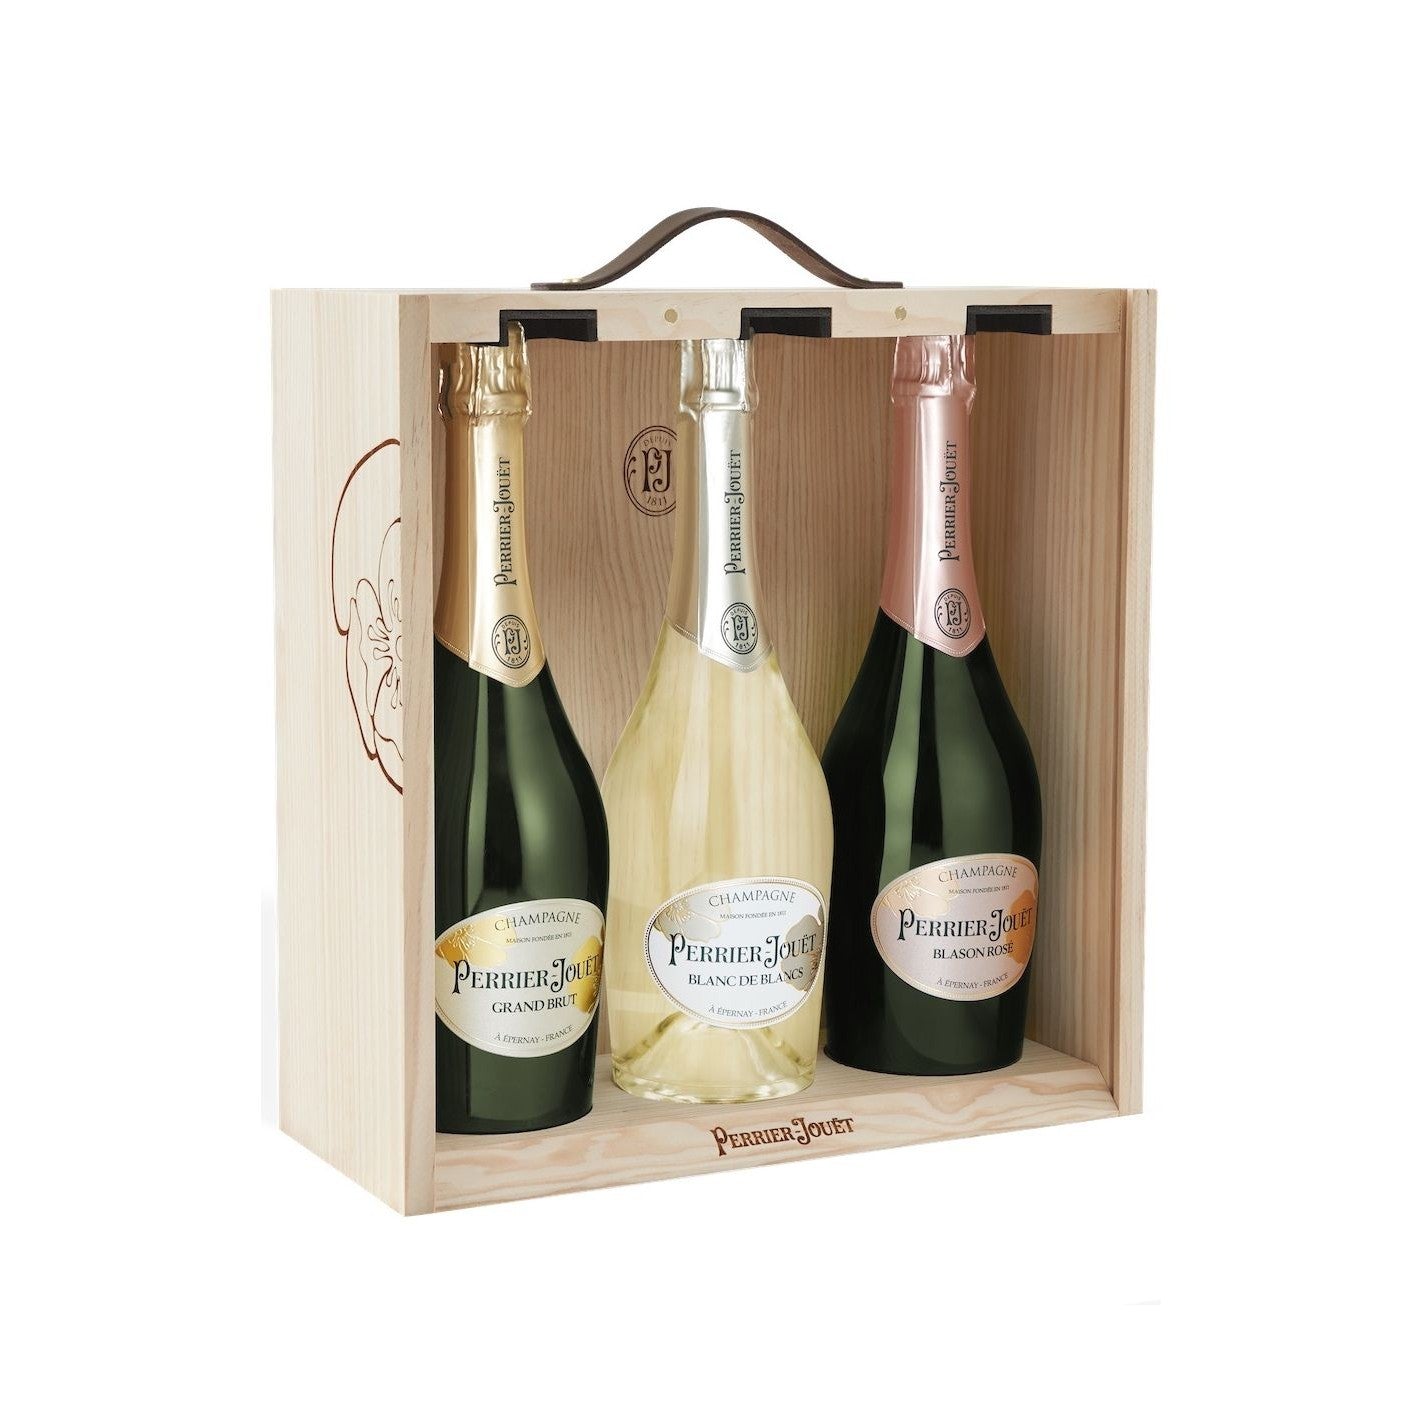 Perrier-Jouët Discovery Trio Gift Box (3 x 750mL) - drinkswithdave